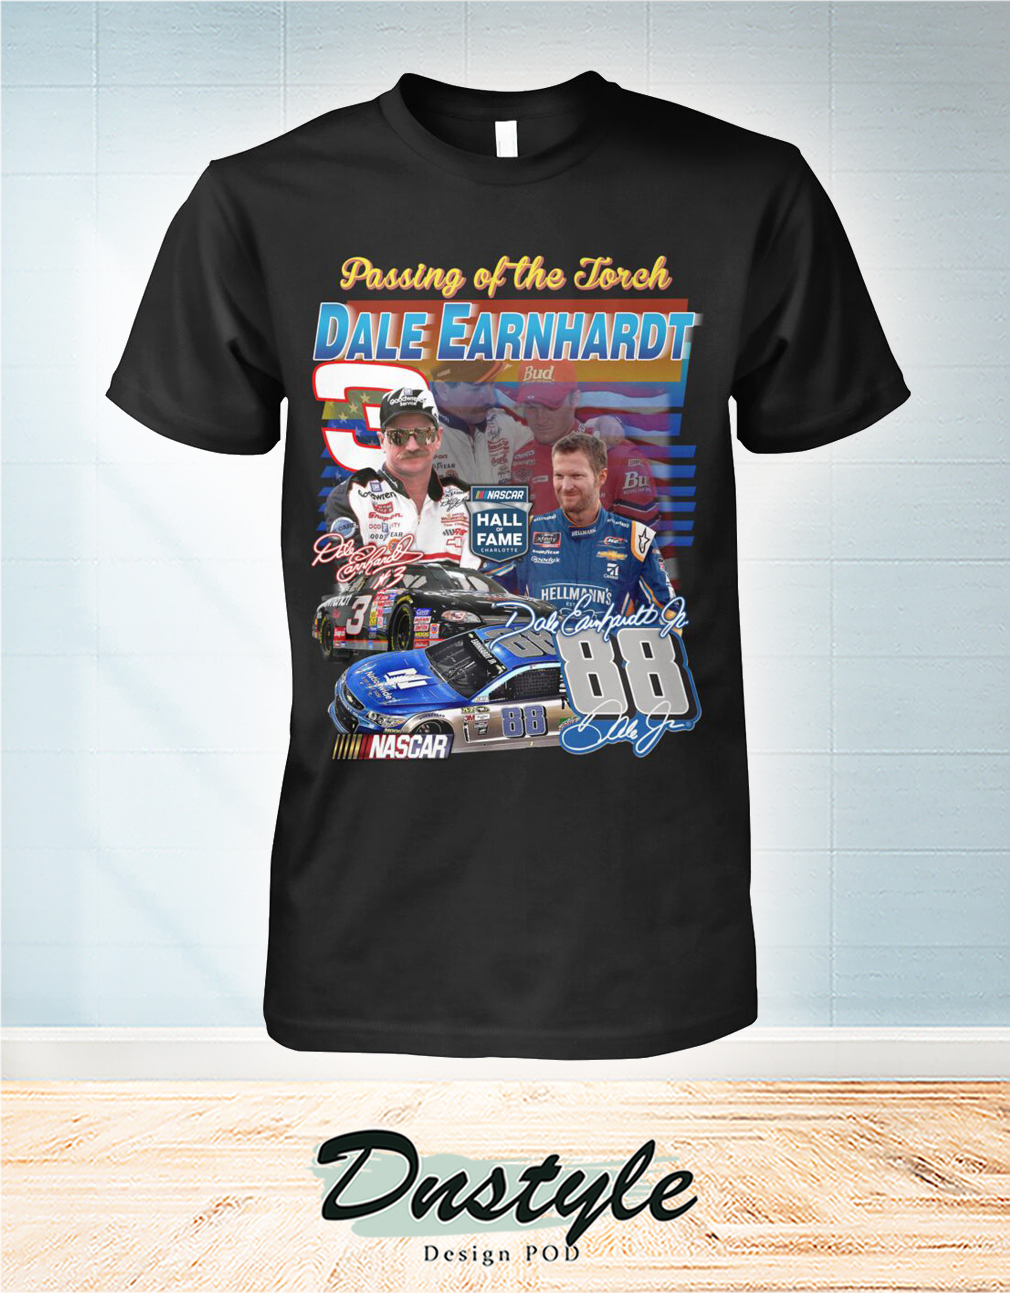 Passing of the forch Dale Earnhardt signature shirt